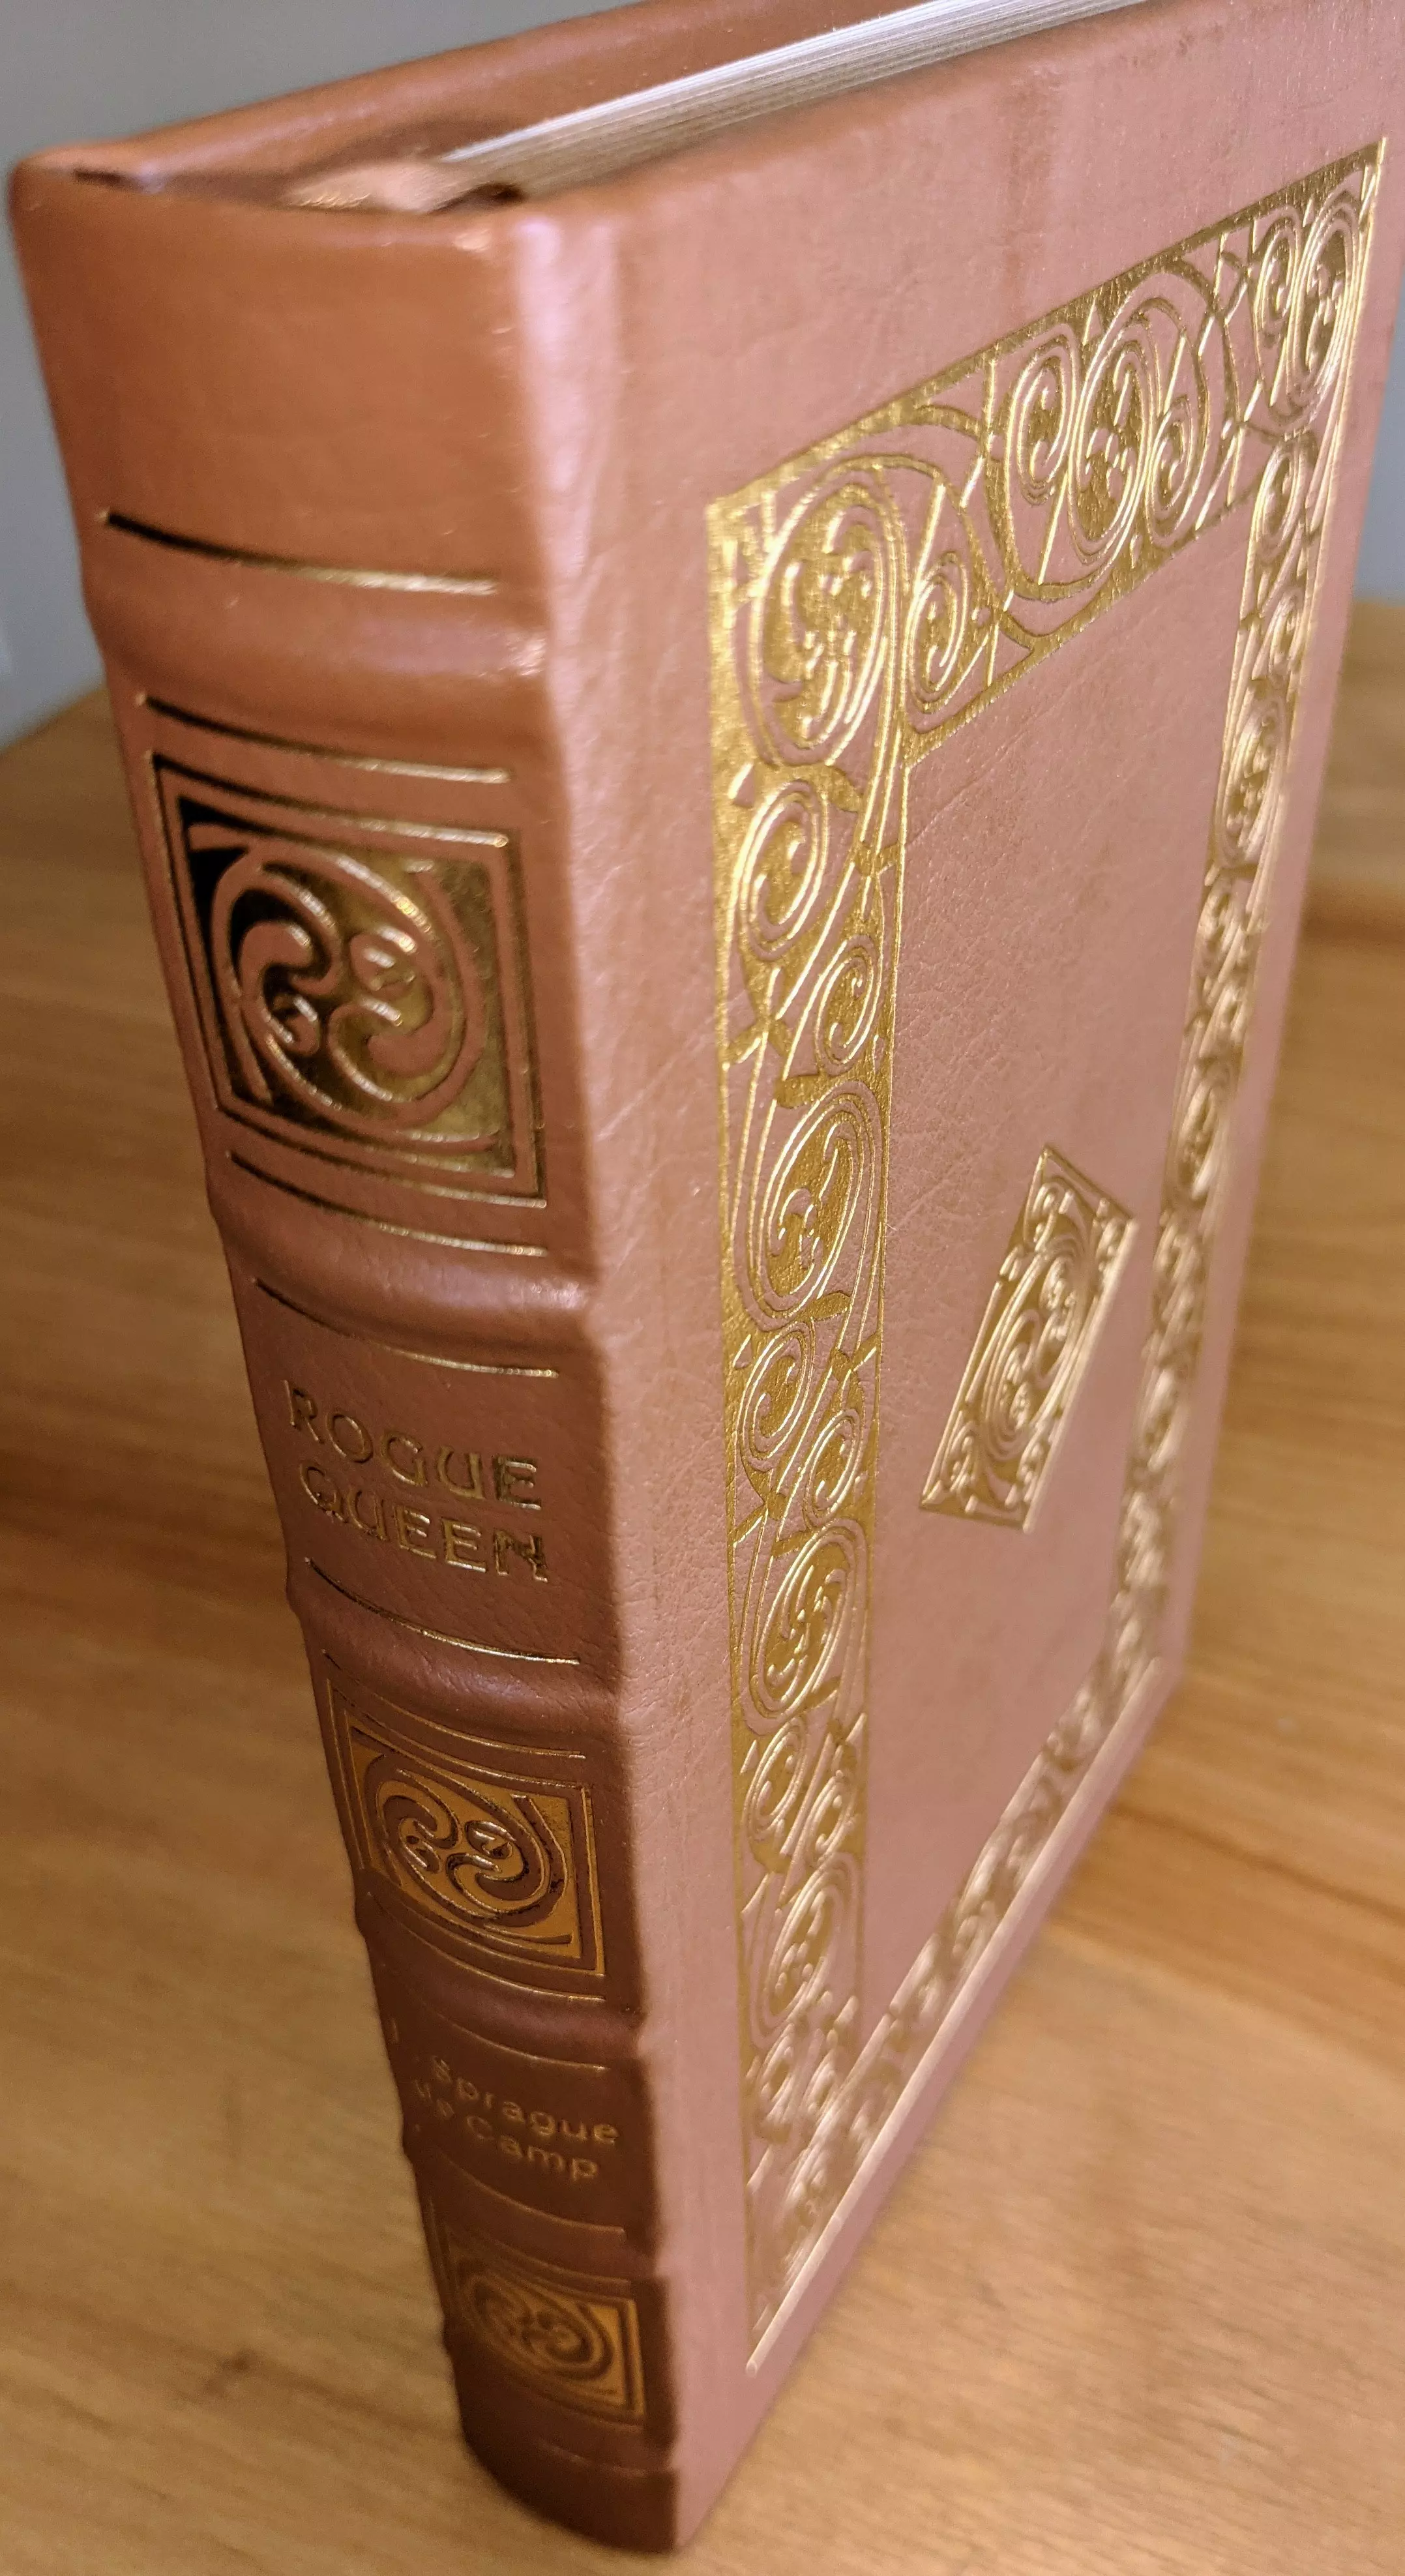 Stunning Tan Leather Bound hardback book with hubbed spine, cover artwork in 22kt gold, printed on archival paper with gold gilded edges, smyth sewing & concealed muslin joints
	  - original artwork by Jill Bauman